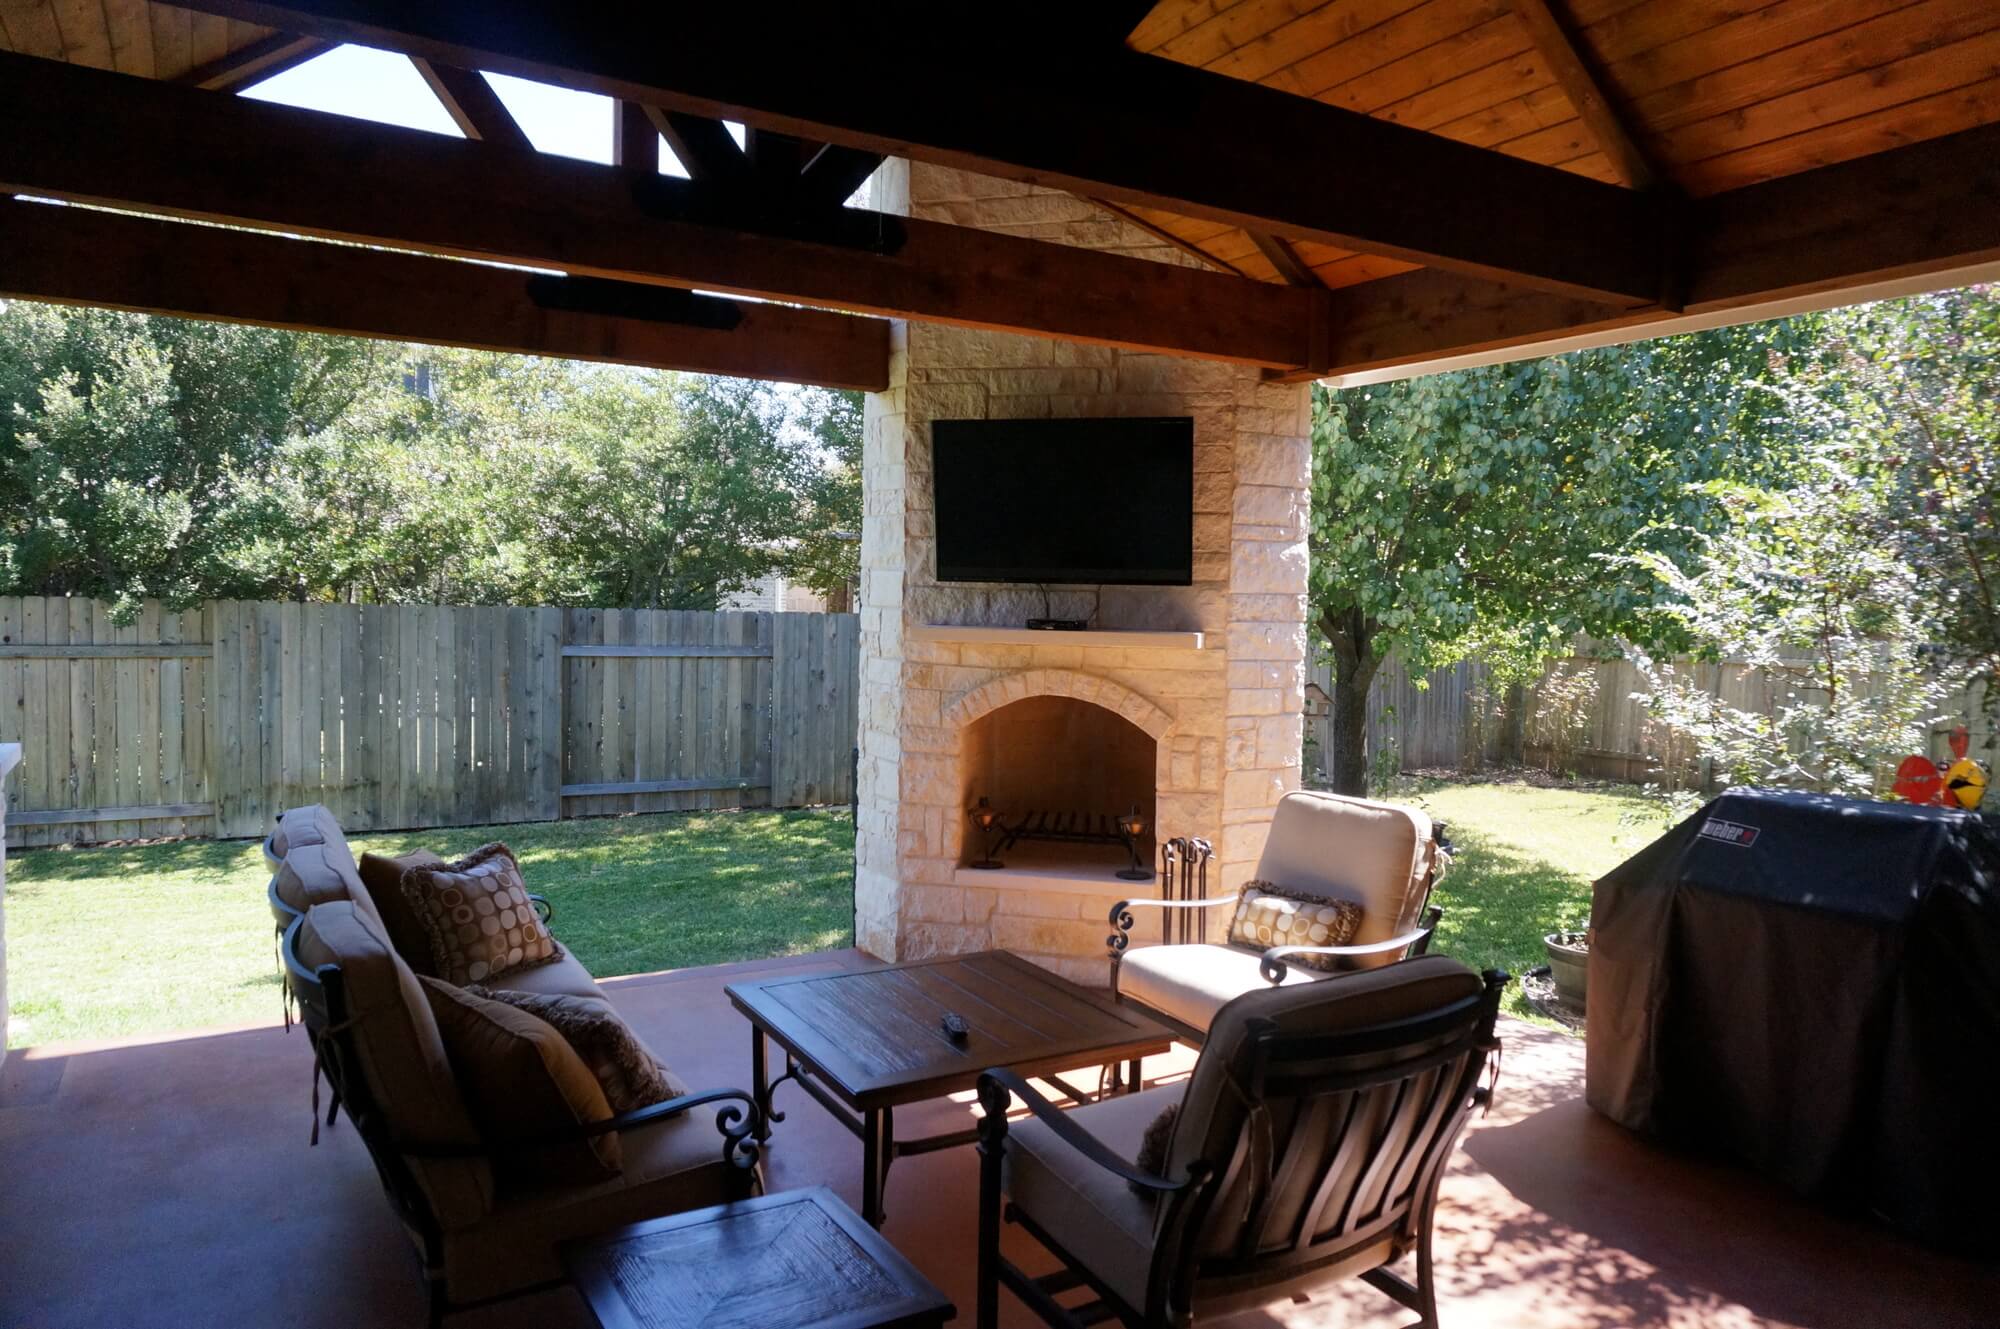 Covered patio with fireplace